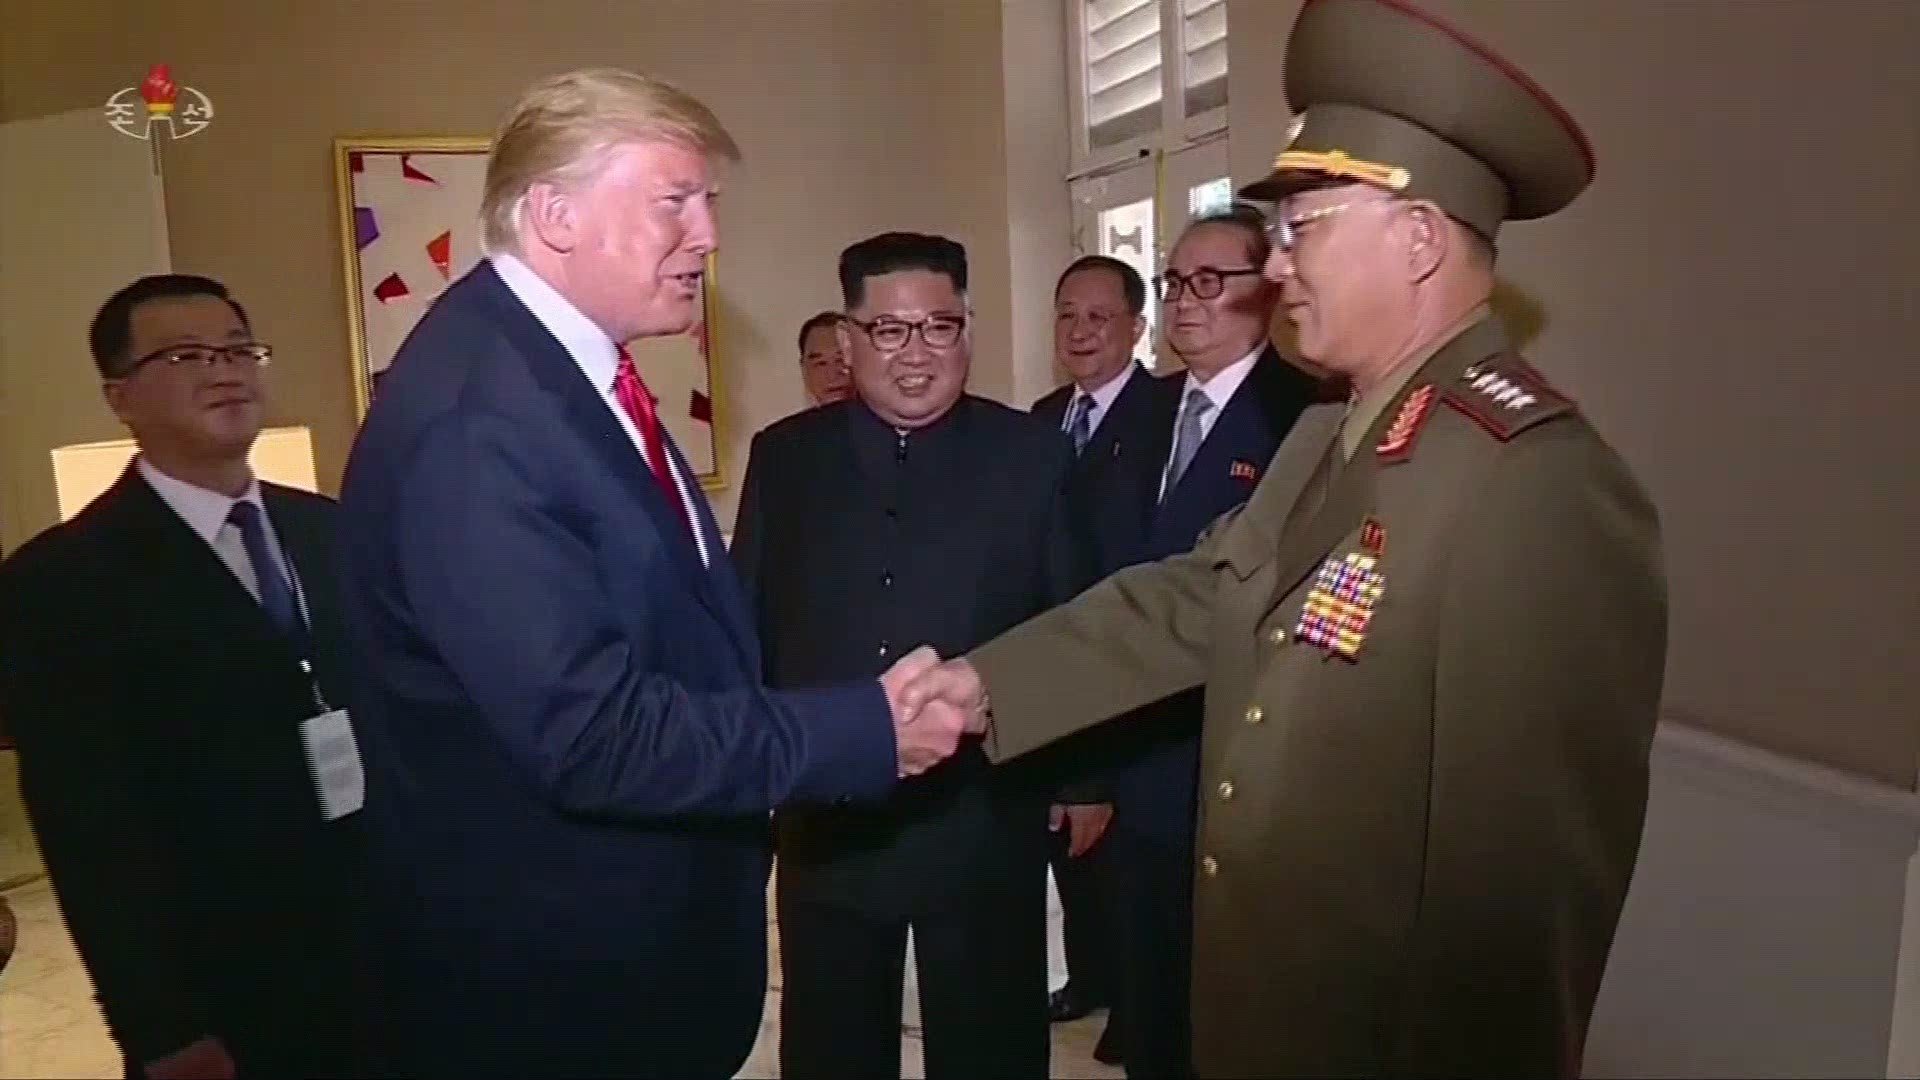 North Korean state television aired video from the historic summit between President Donald Trump and Kim Jong Un Thursday that included a surprising moment when the American president saluted a North Korean general.